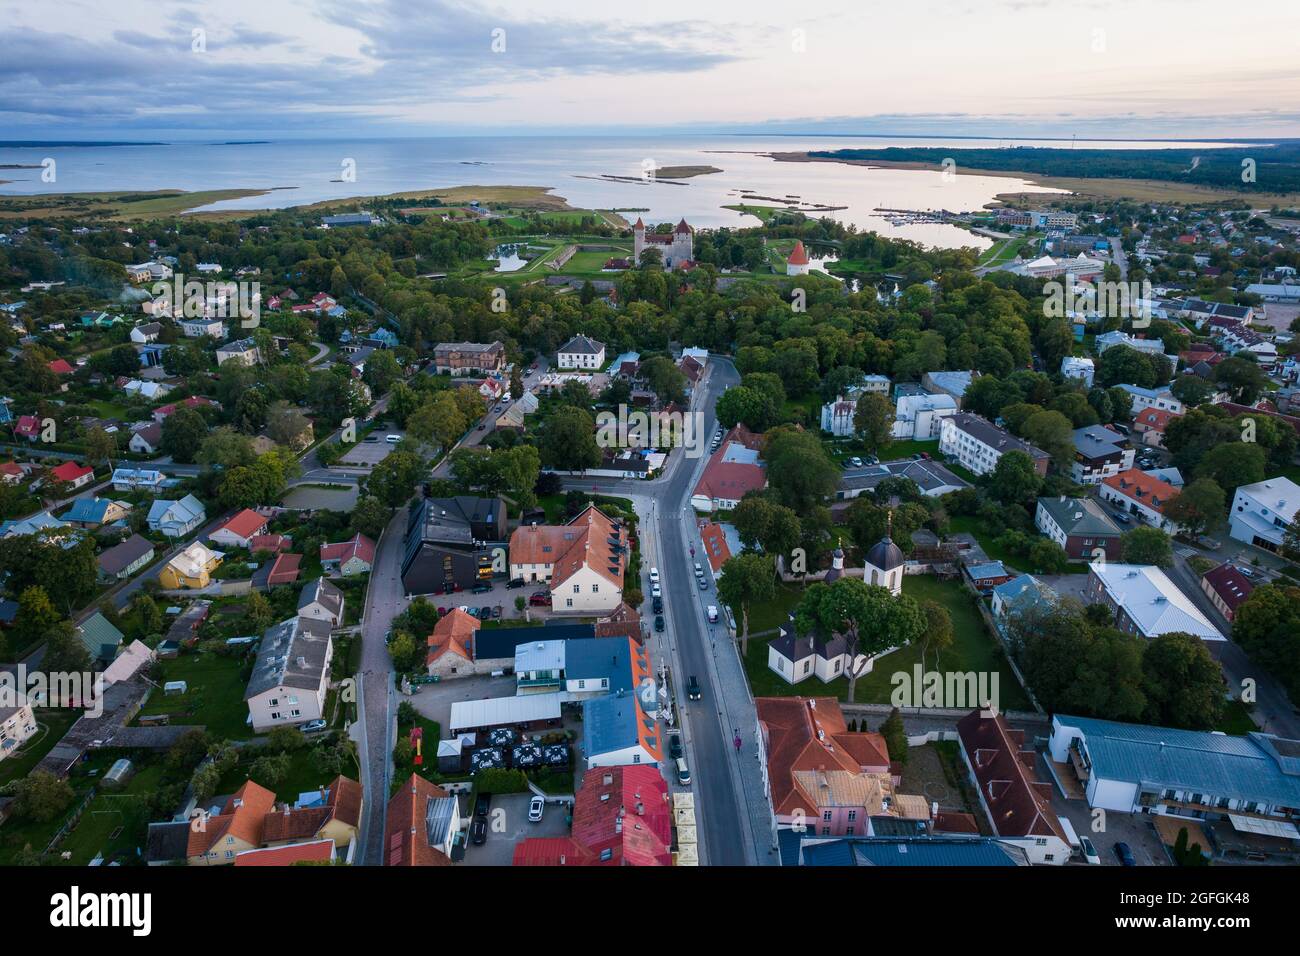 An aerial view of Kuressaare city in Saaremaa island during late August evening. Stock Photo